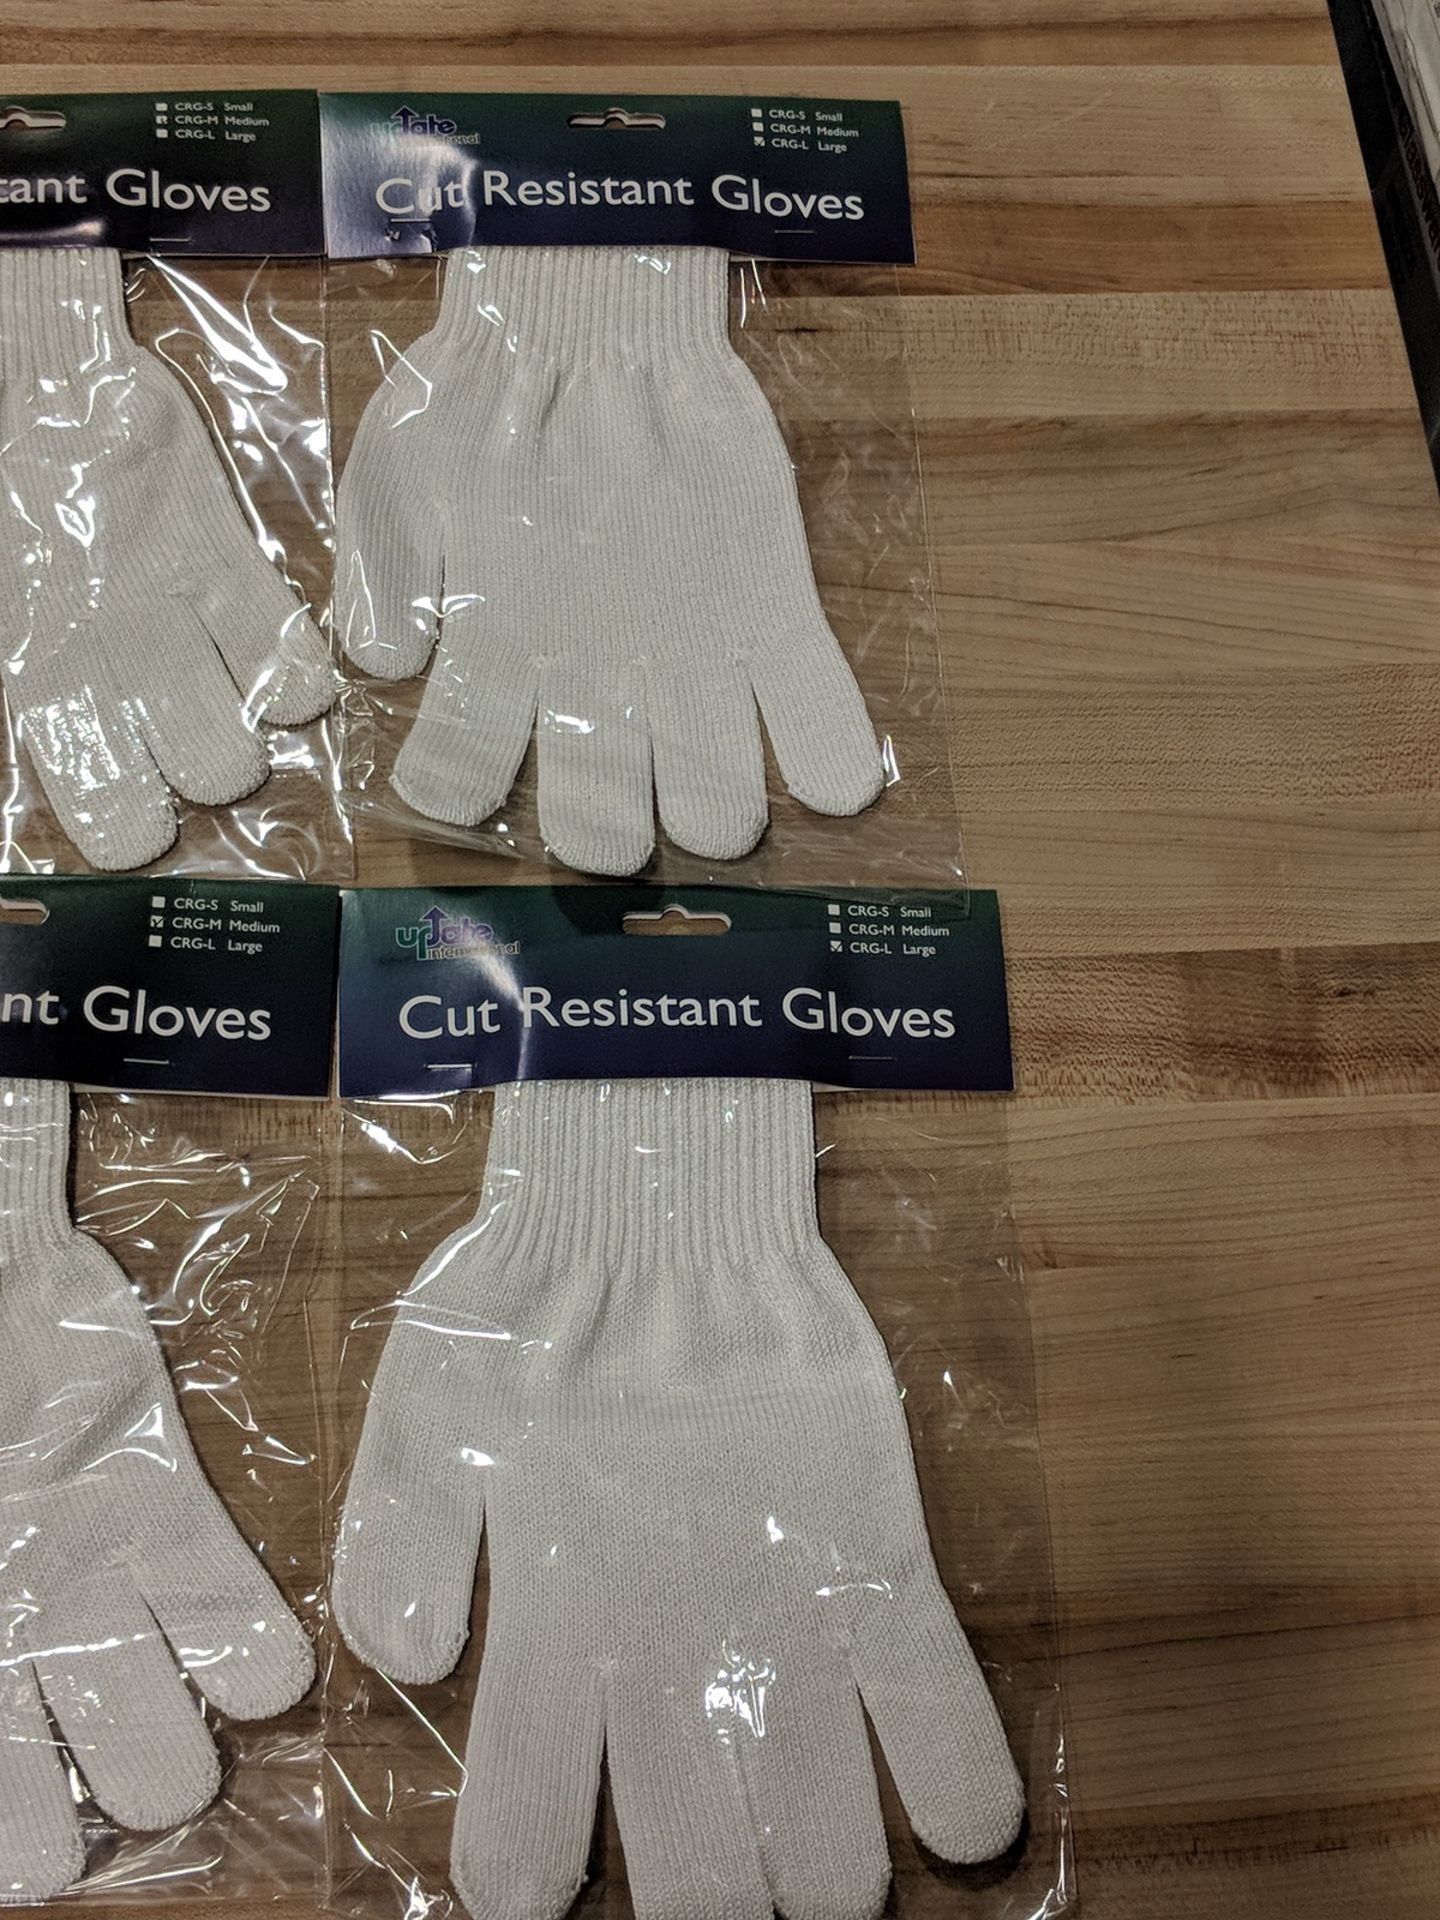 Large (10.25") Cut-Resistant Gloves - Lot of 2